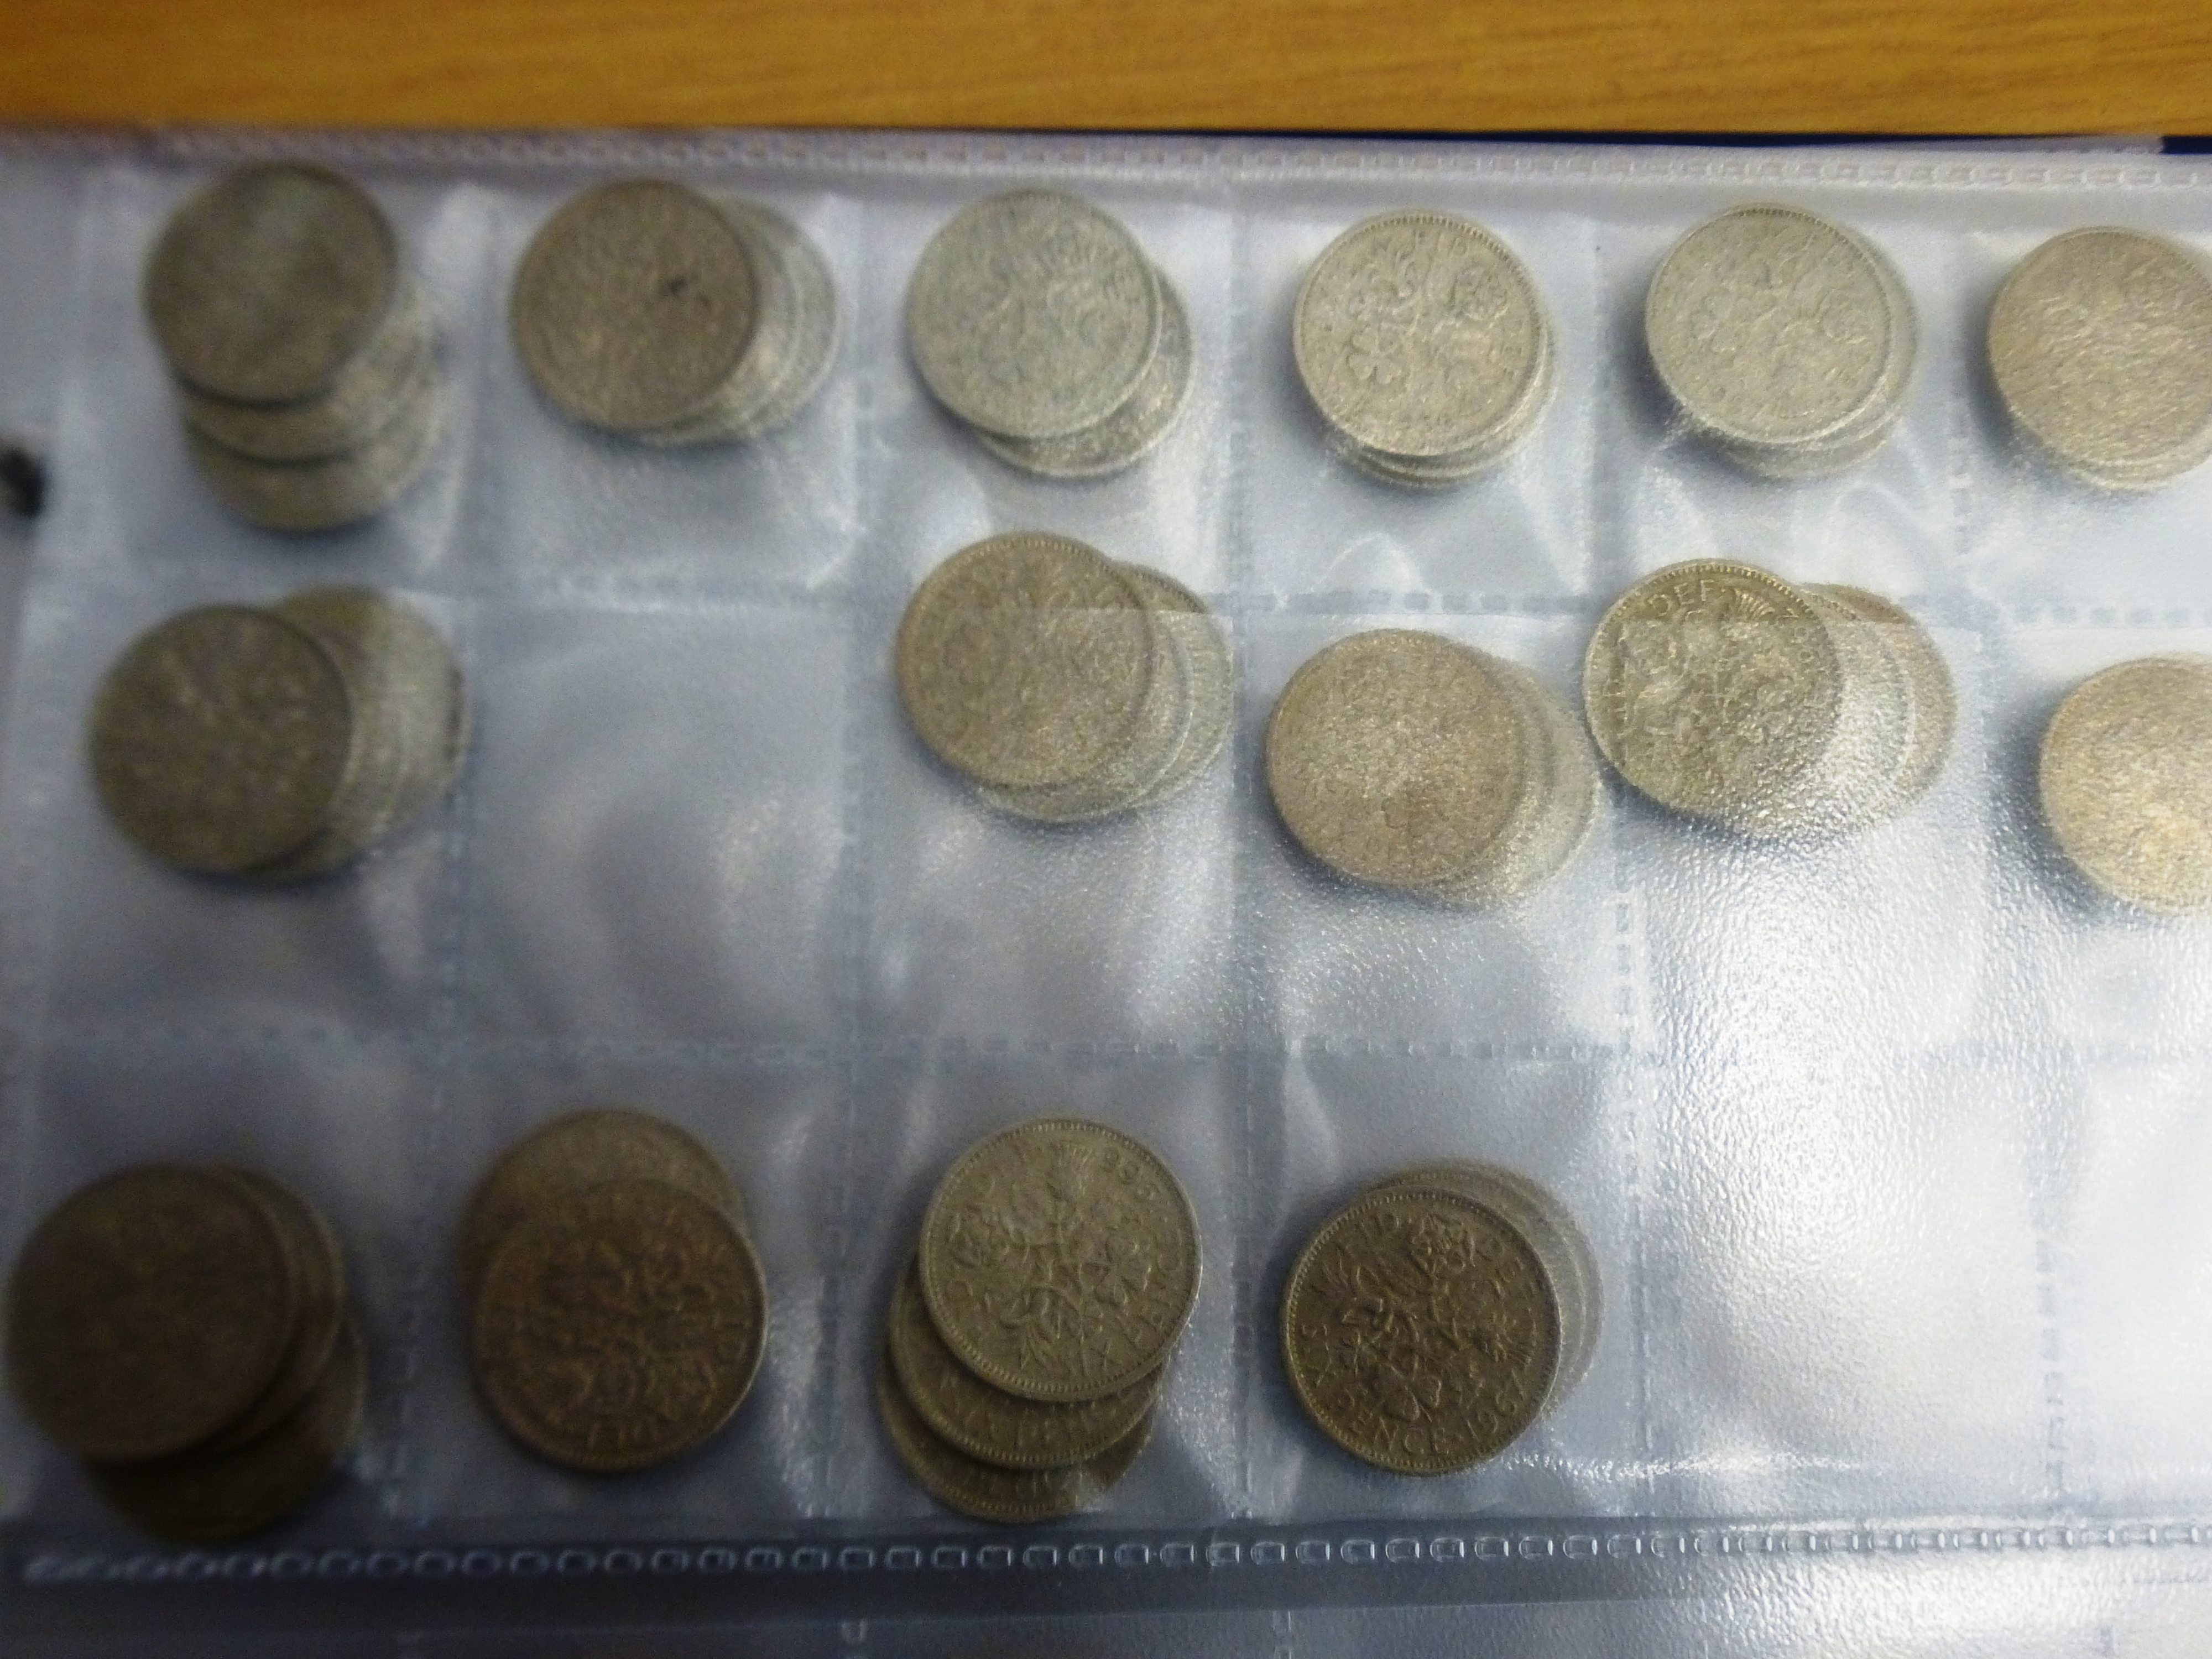 COIN ALBUM OF ASSORTED COINS AND BANK NOTES MOSTLY UK INCLUDING SILVER COINAGE AND 1890 CROWN - Image 7 of 11